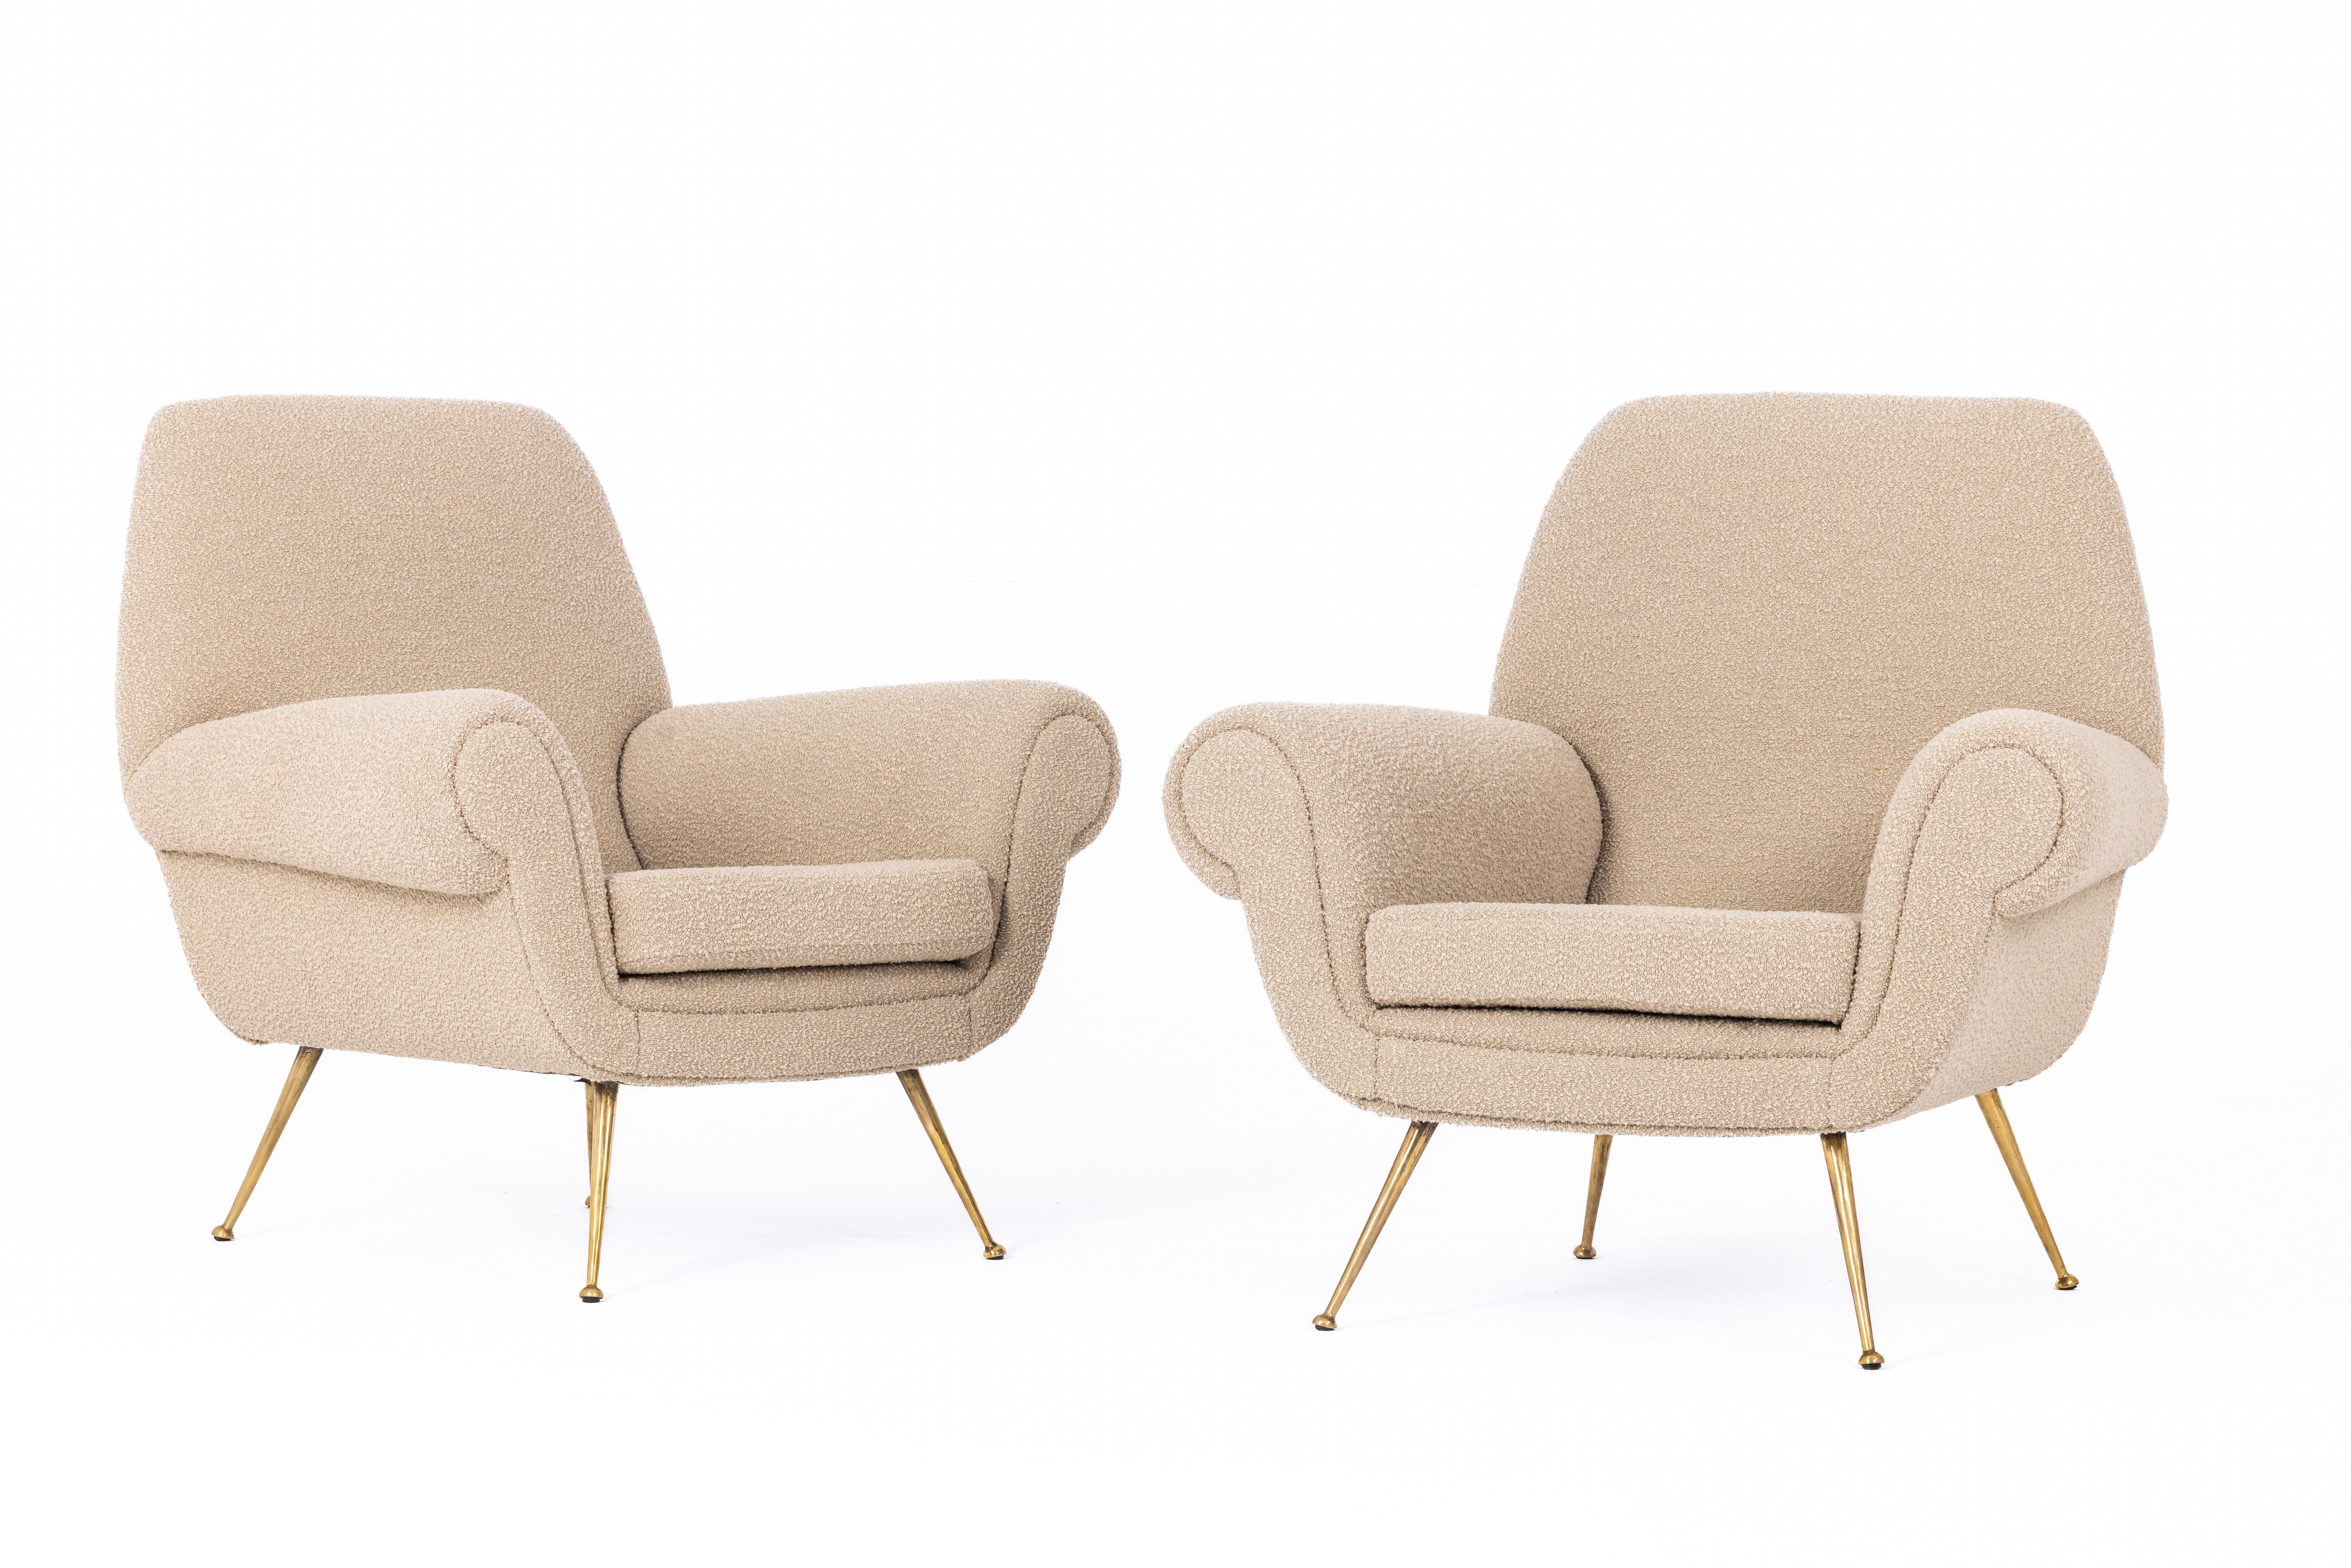 20th Century Pair of armchairs by Gigi Radice, Italy 1950s, fabric Bisson Bruneel For Sale